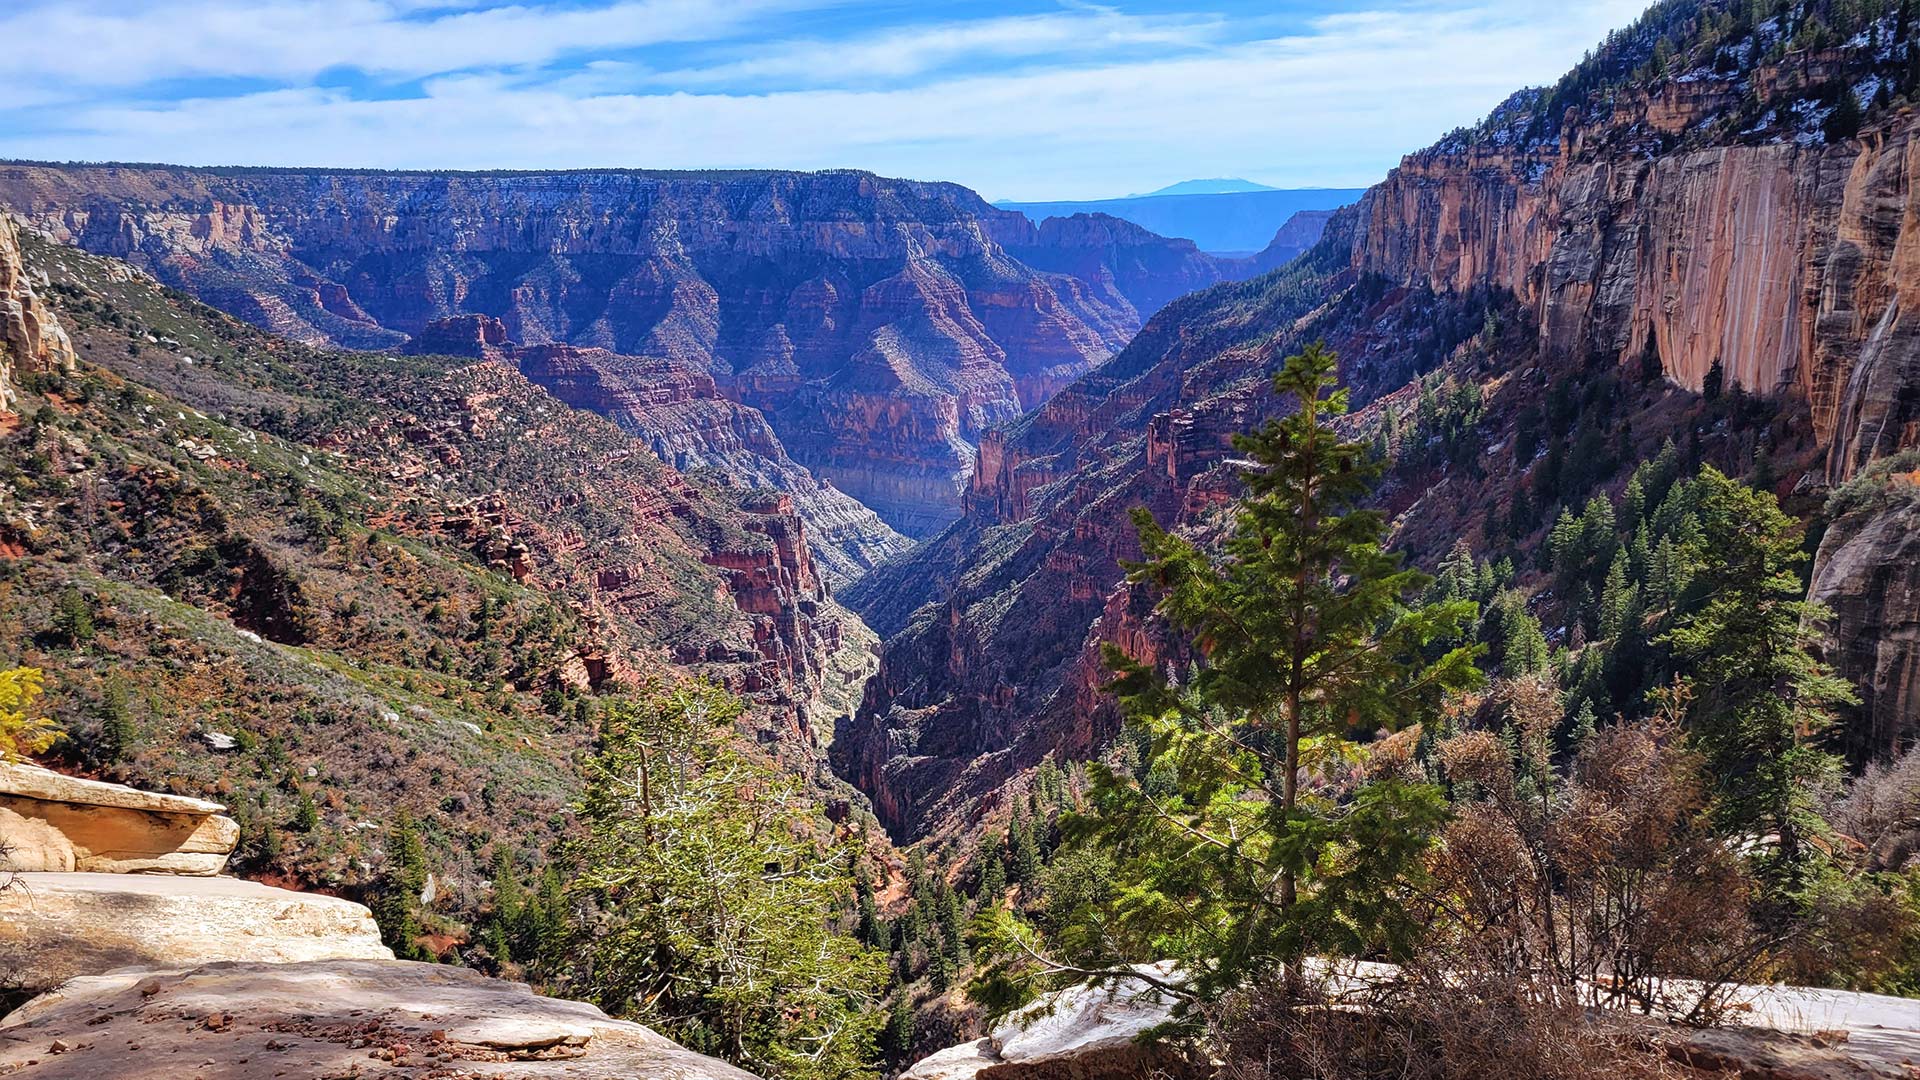 A view from Coconino Overlook at the north rim of the Grand Canyon.